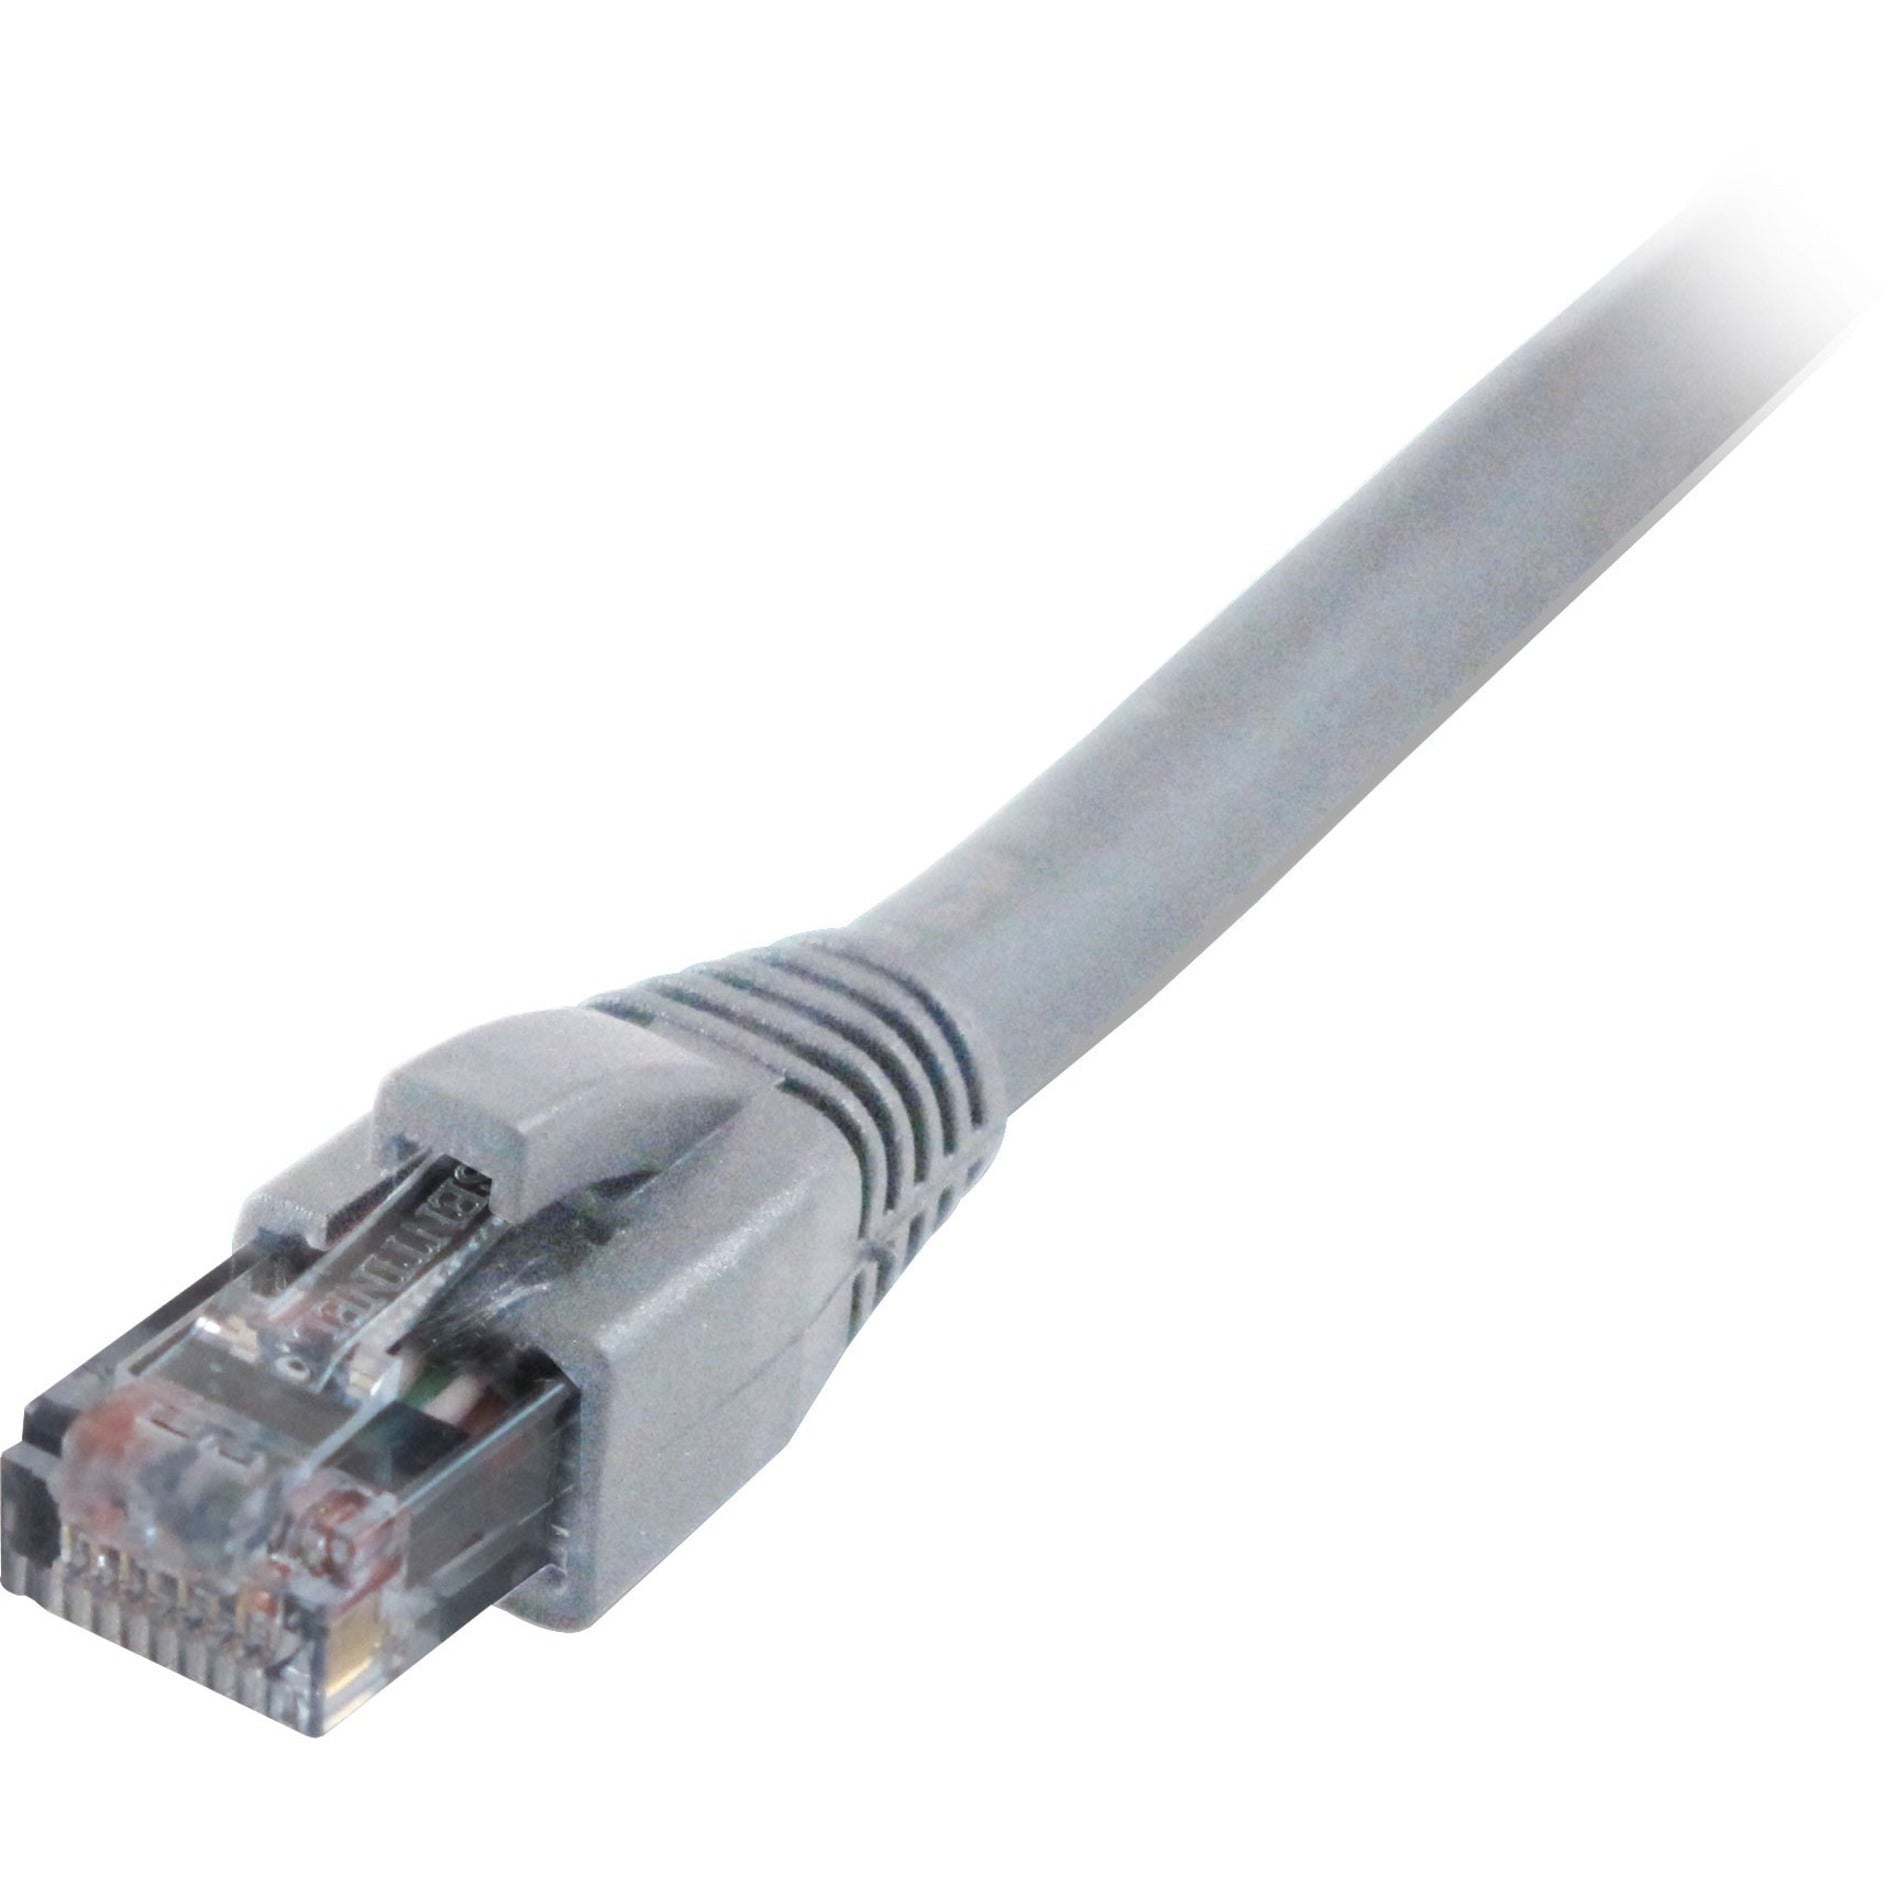 Comprehensive CAT6-100GRY Cat6 550 Mhz Snagless Patch Cable 100ft Gray, Molded, Strain Relief, Stranded, Booted, 1 Gbit/s Data Transfer Rate